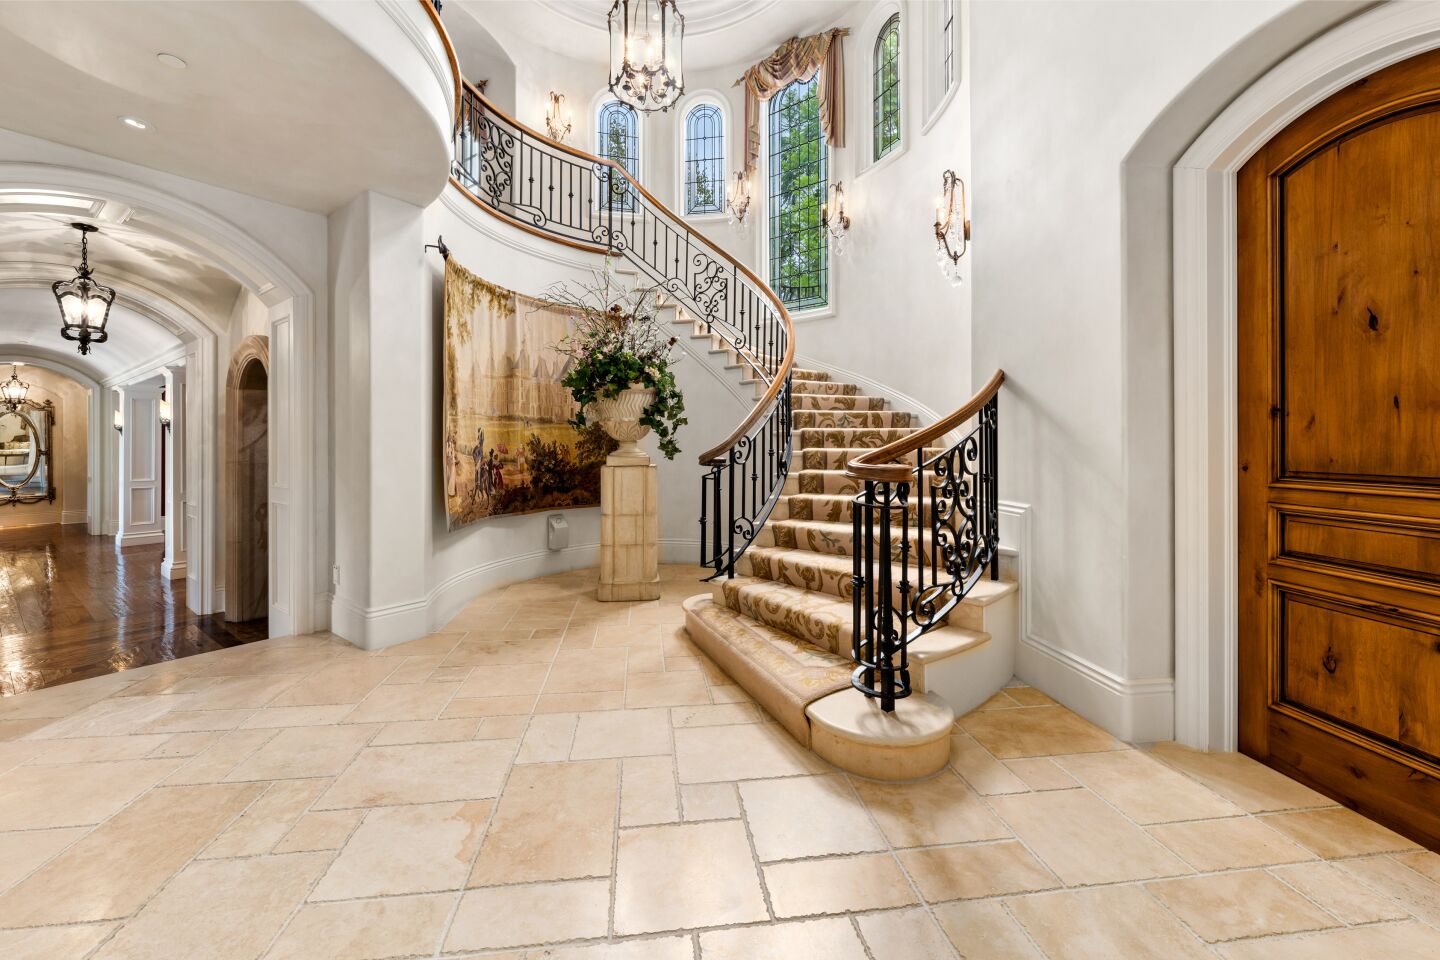 The white foyer leads to a staircase and a hallway.